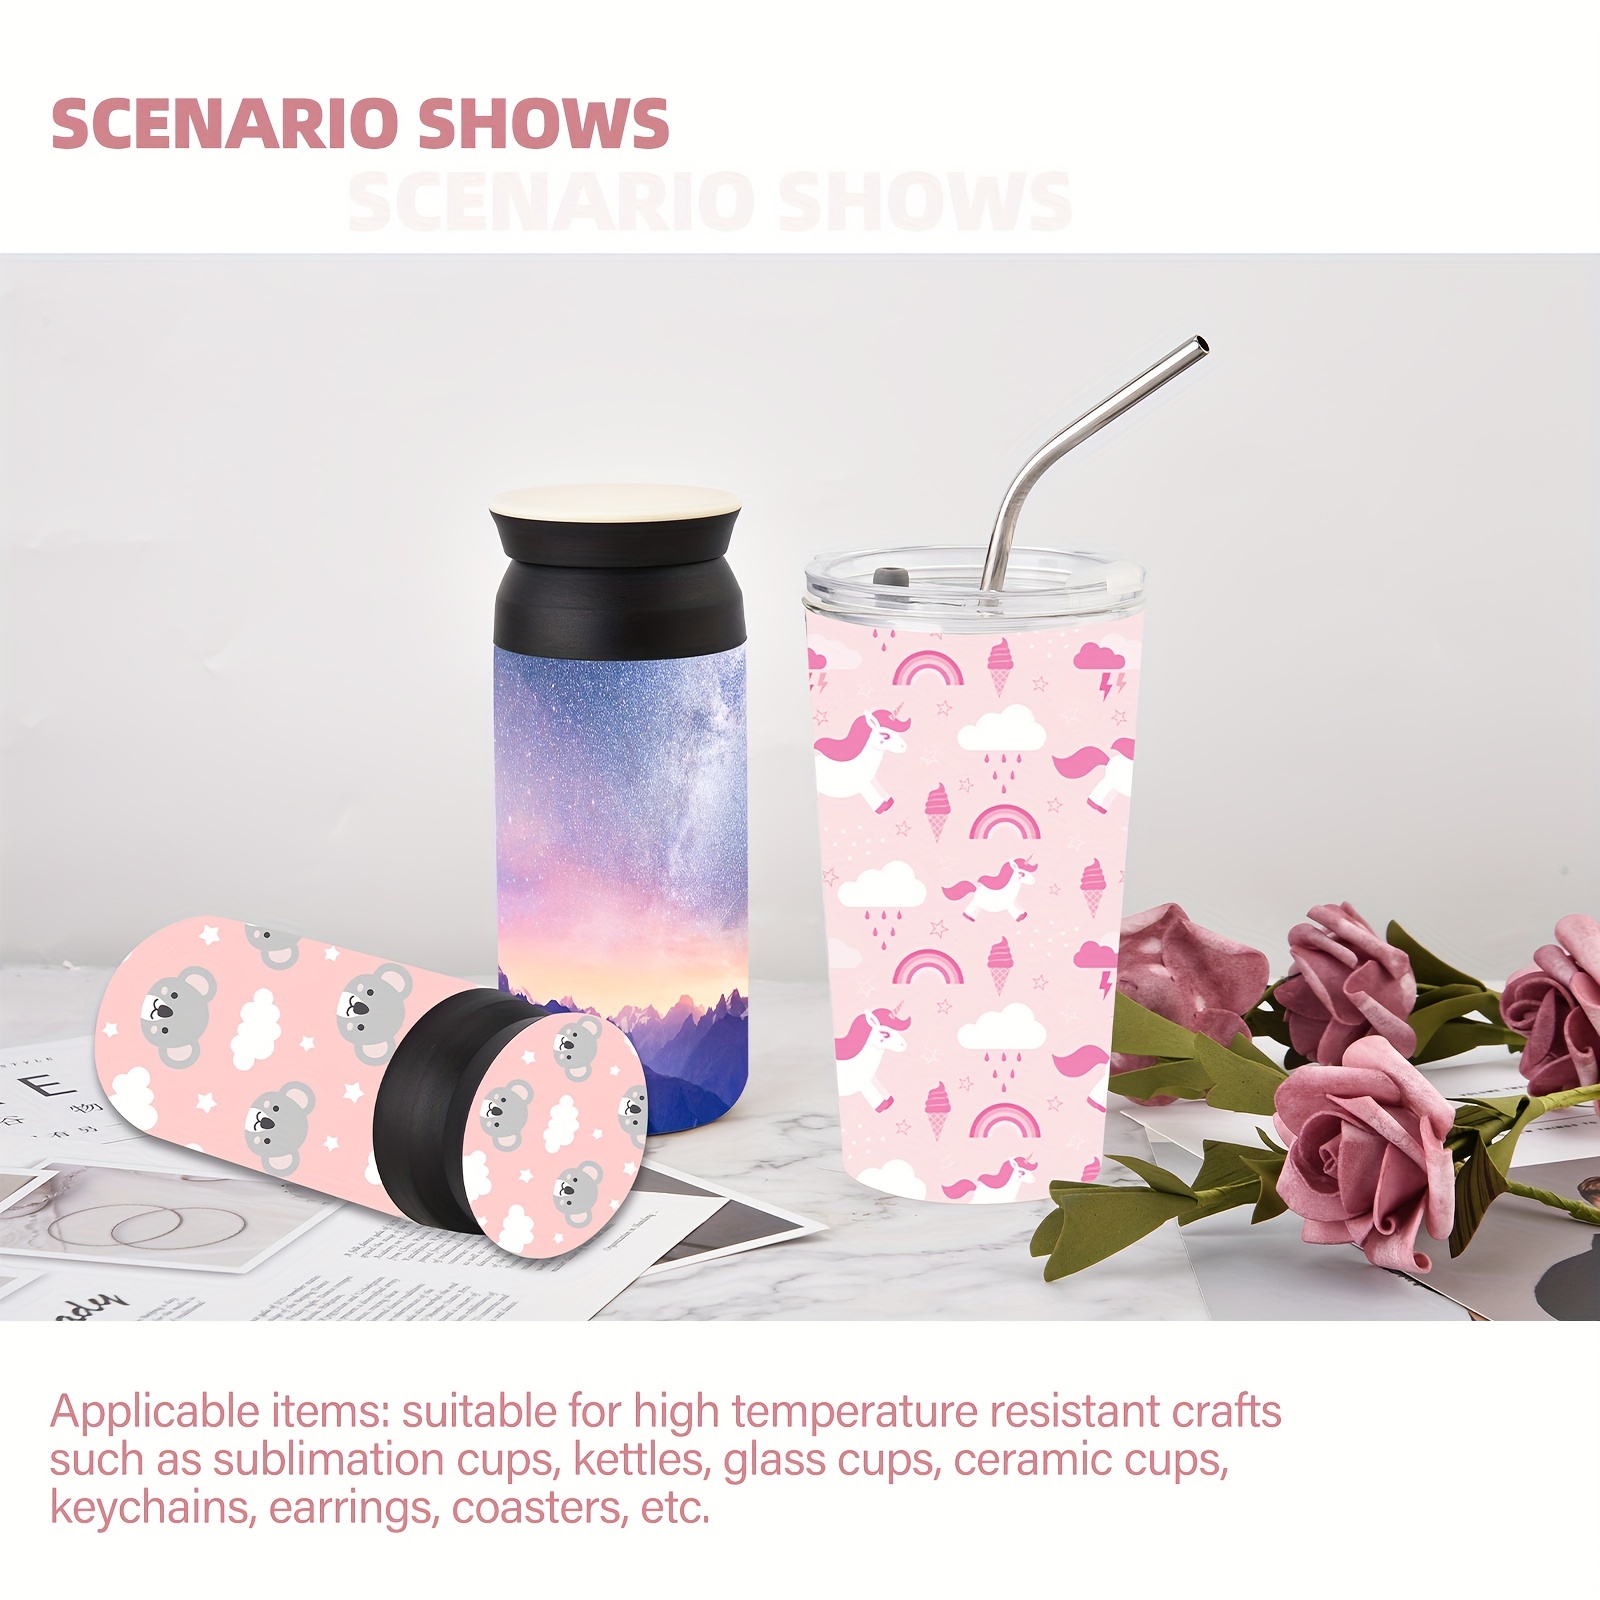 Wsdart Sublimation Tumblers Pinch Perfect Tool For 15 20